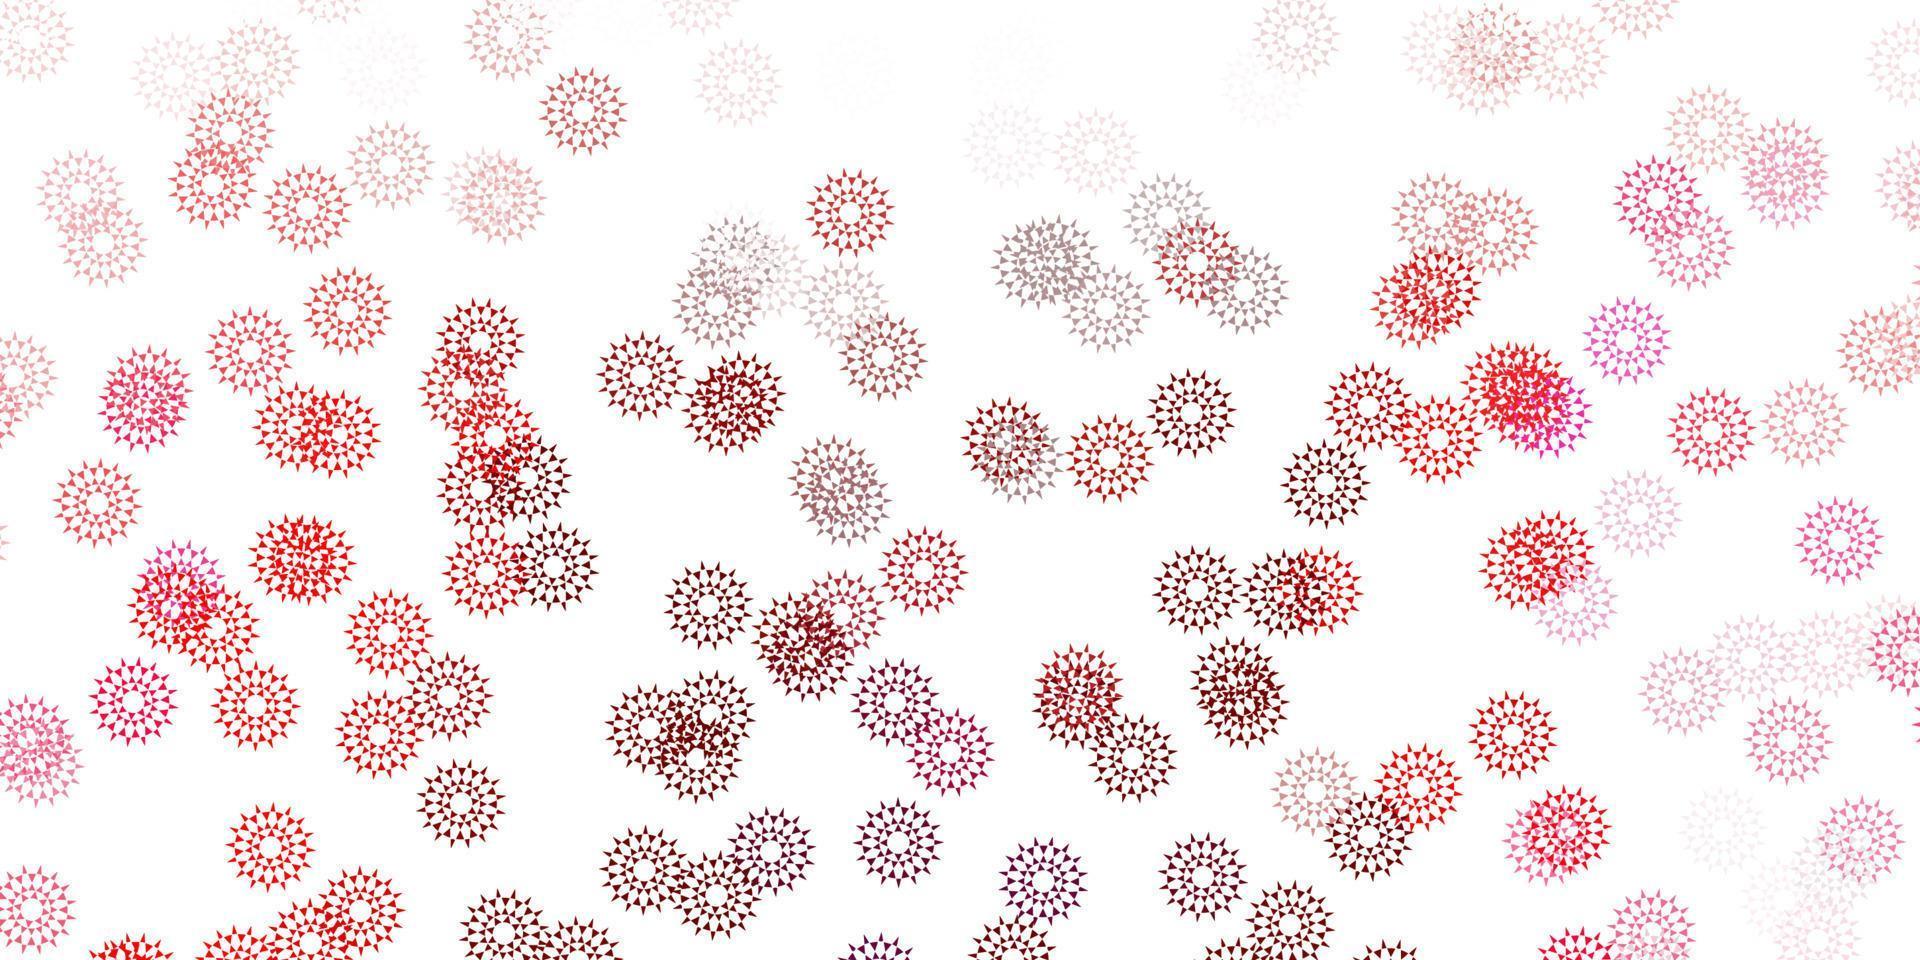 Light pink, red vector doodle background with flowers.